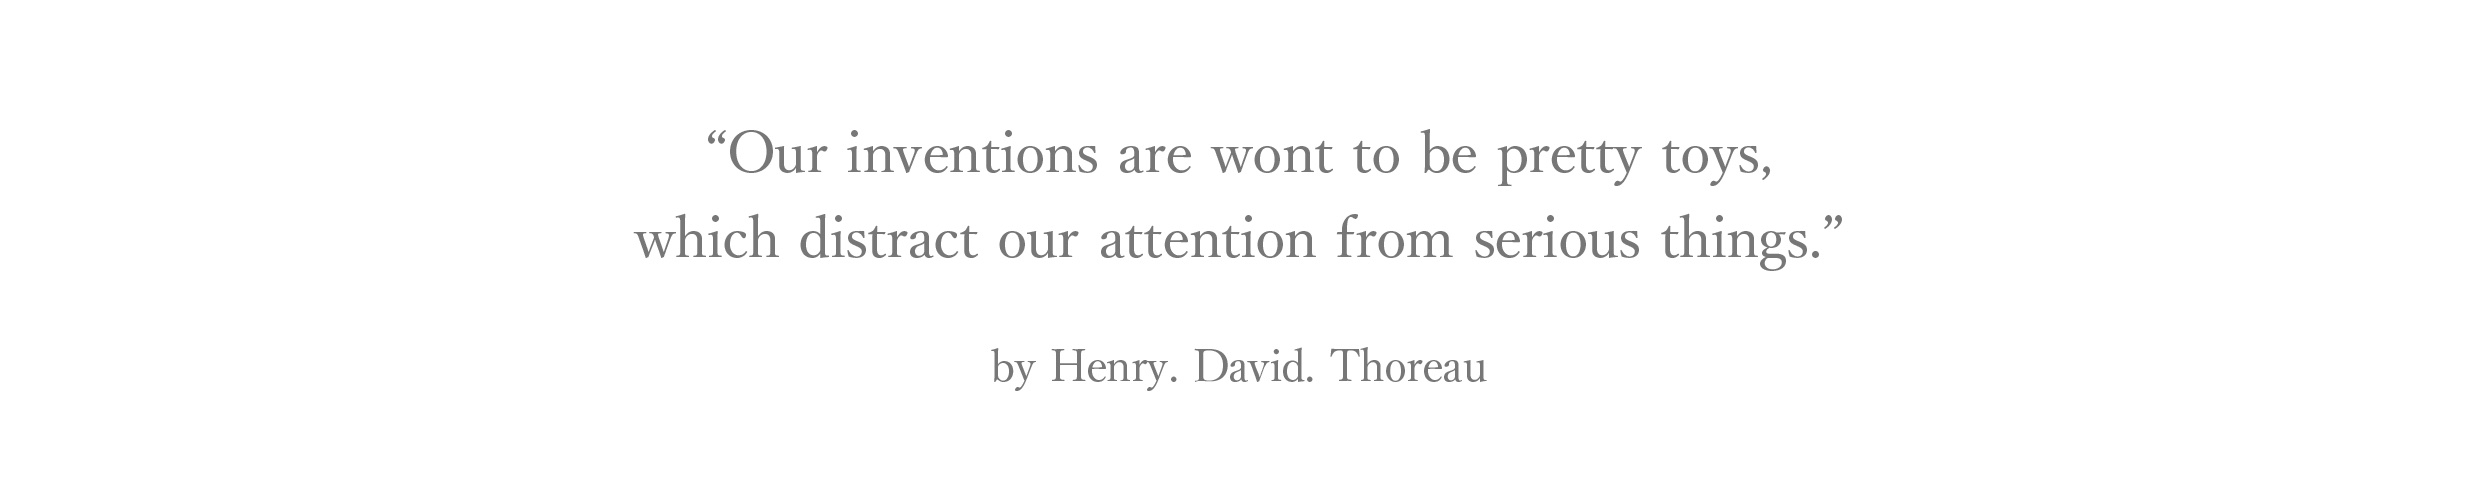 “Our inventions are wont to be pretty toys,which distract our attention from serious things.”by Henry. David. Thoreau